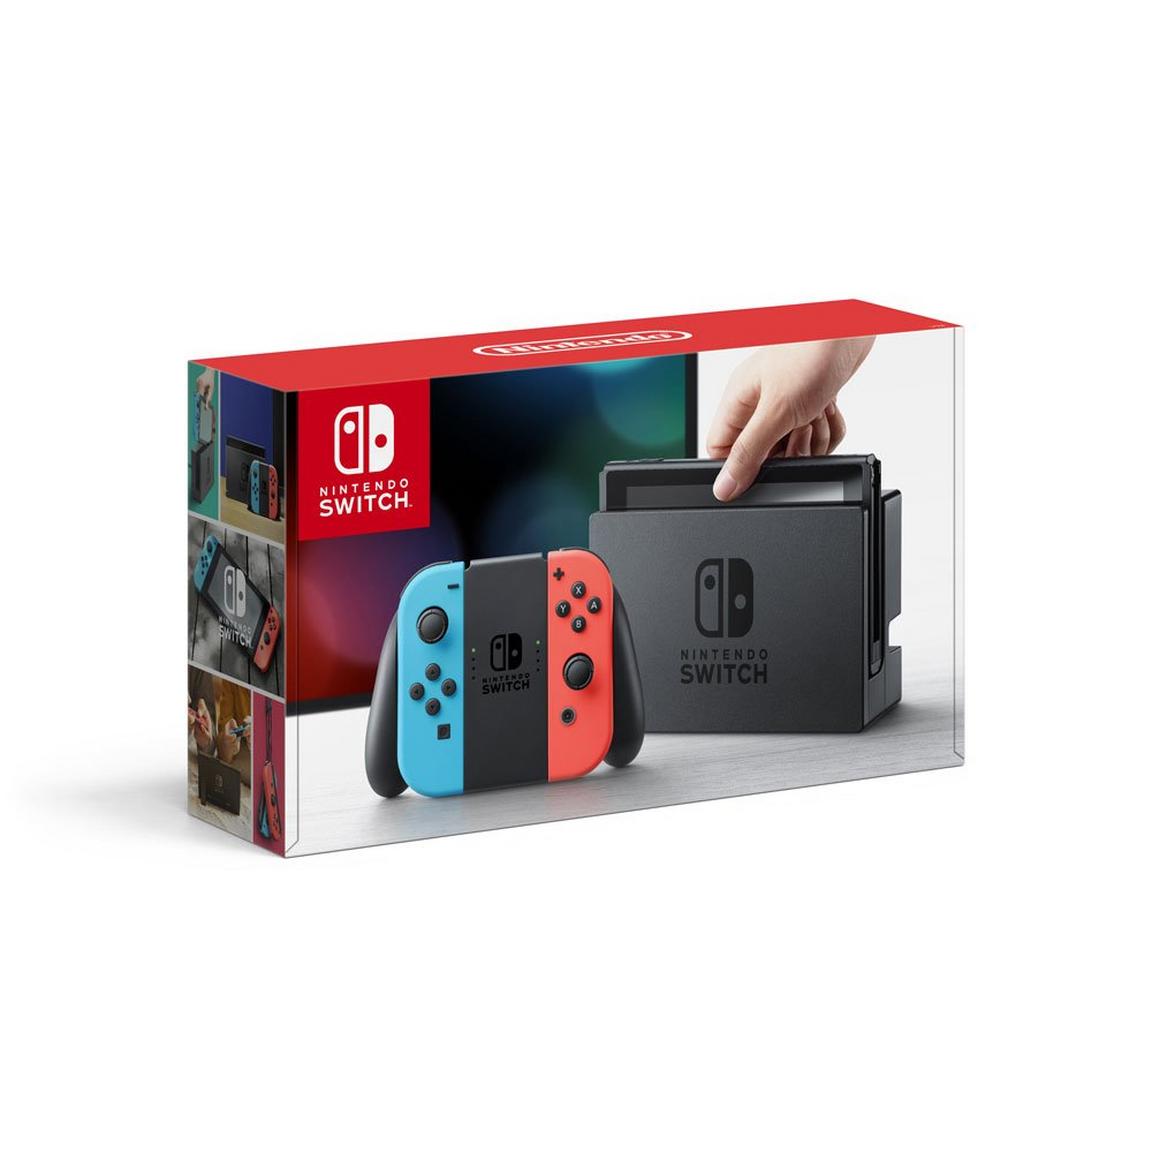 Nintendo Switch with Joy-Con Controller, Neon/Blueneon/Red